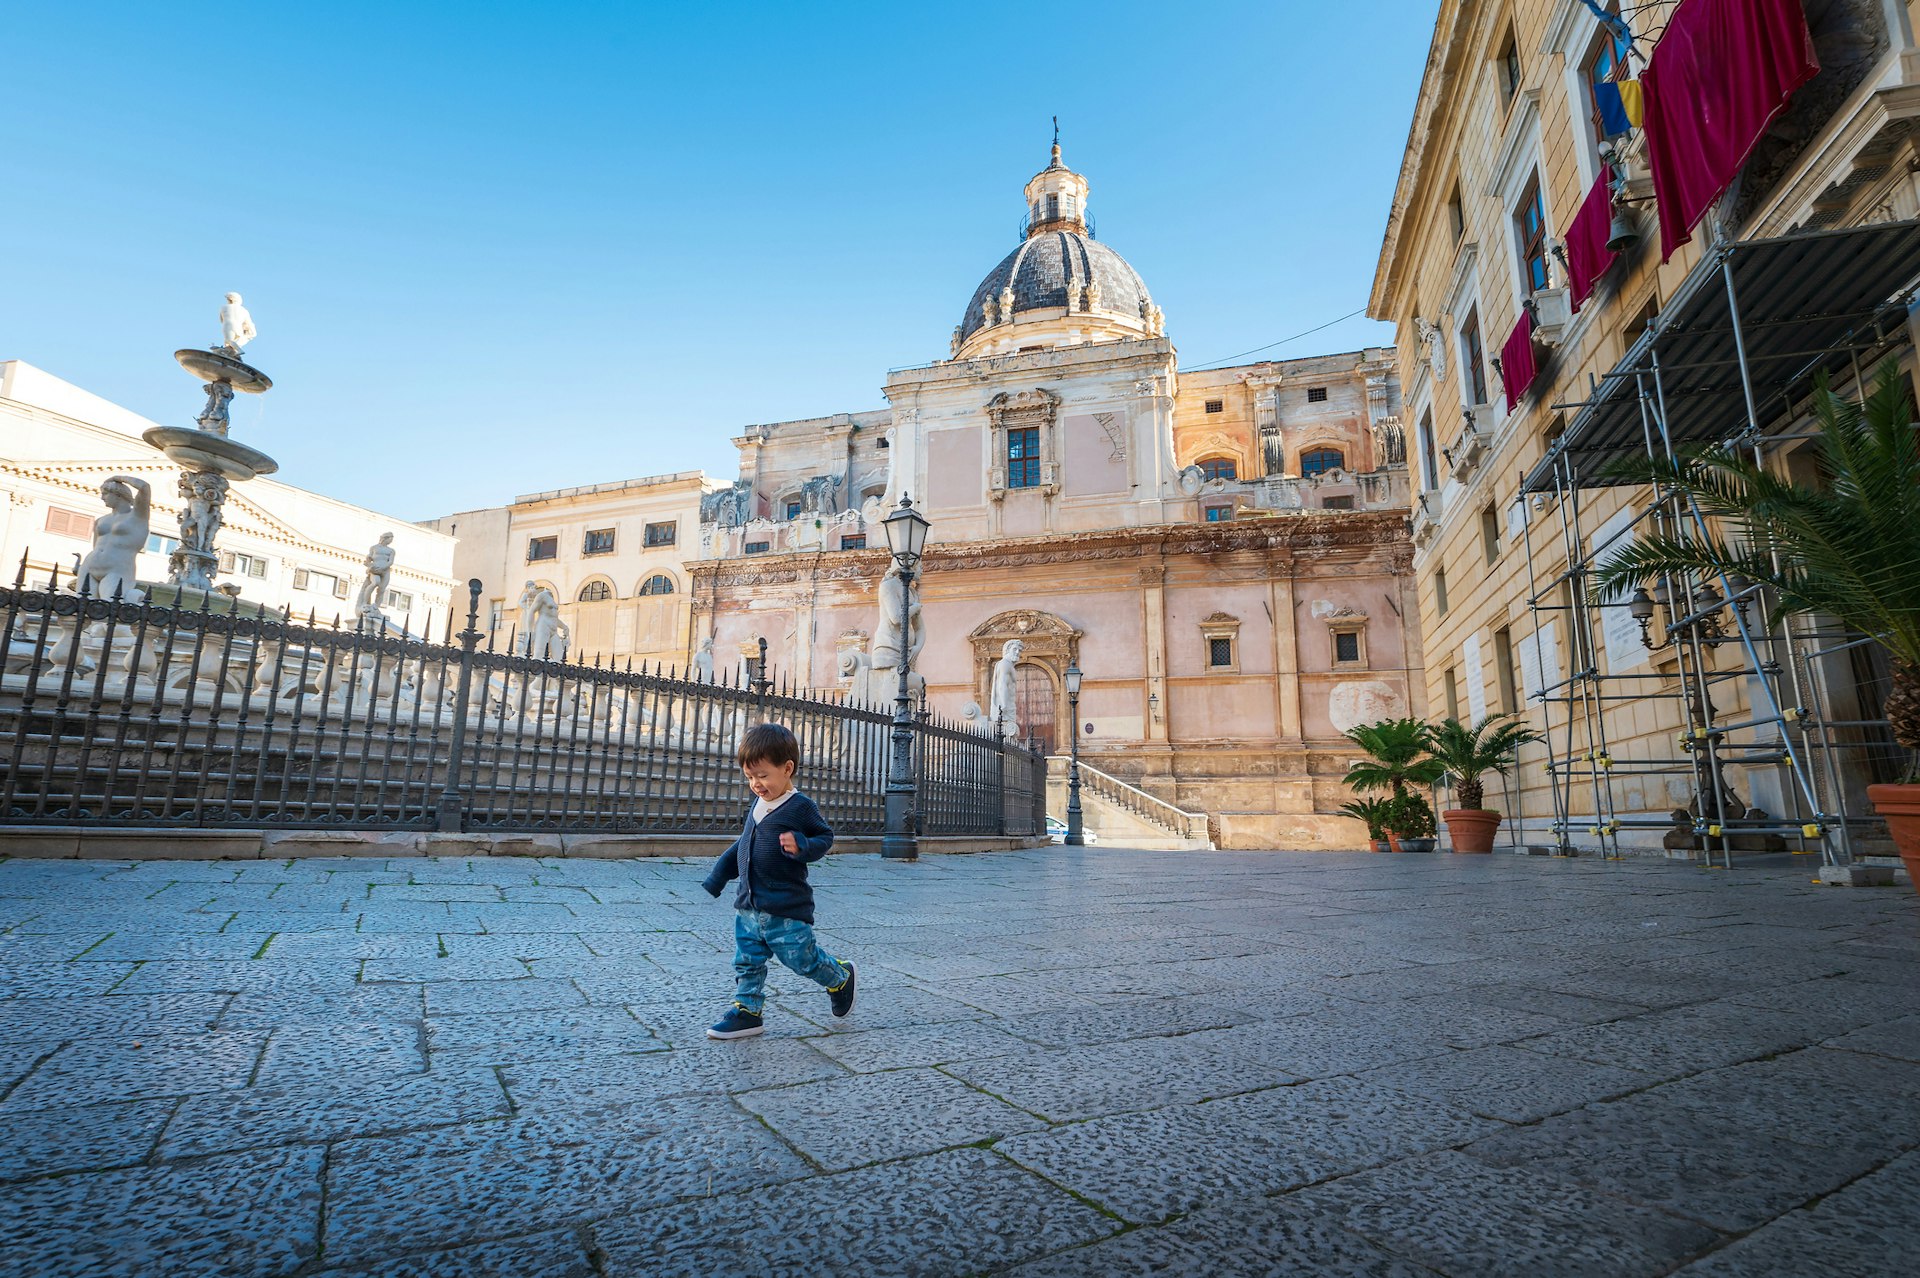 A small toddler wanders around in a public square on a sunny day